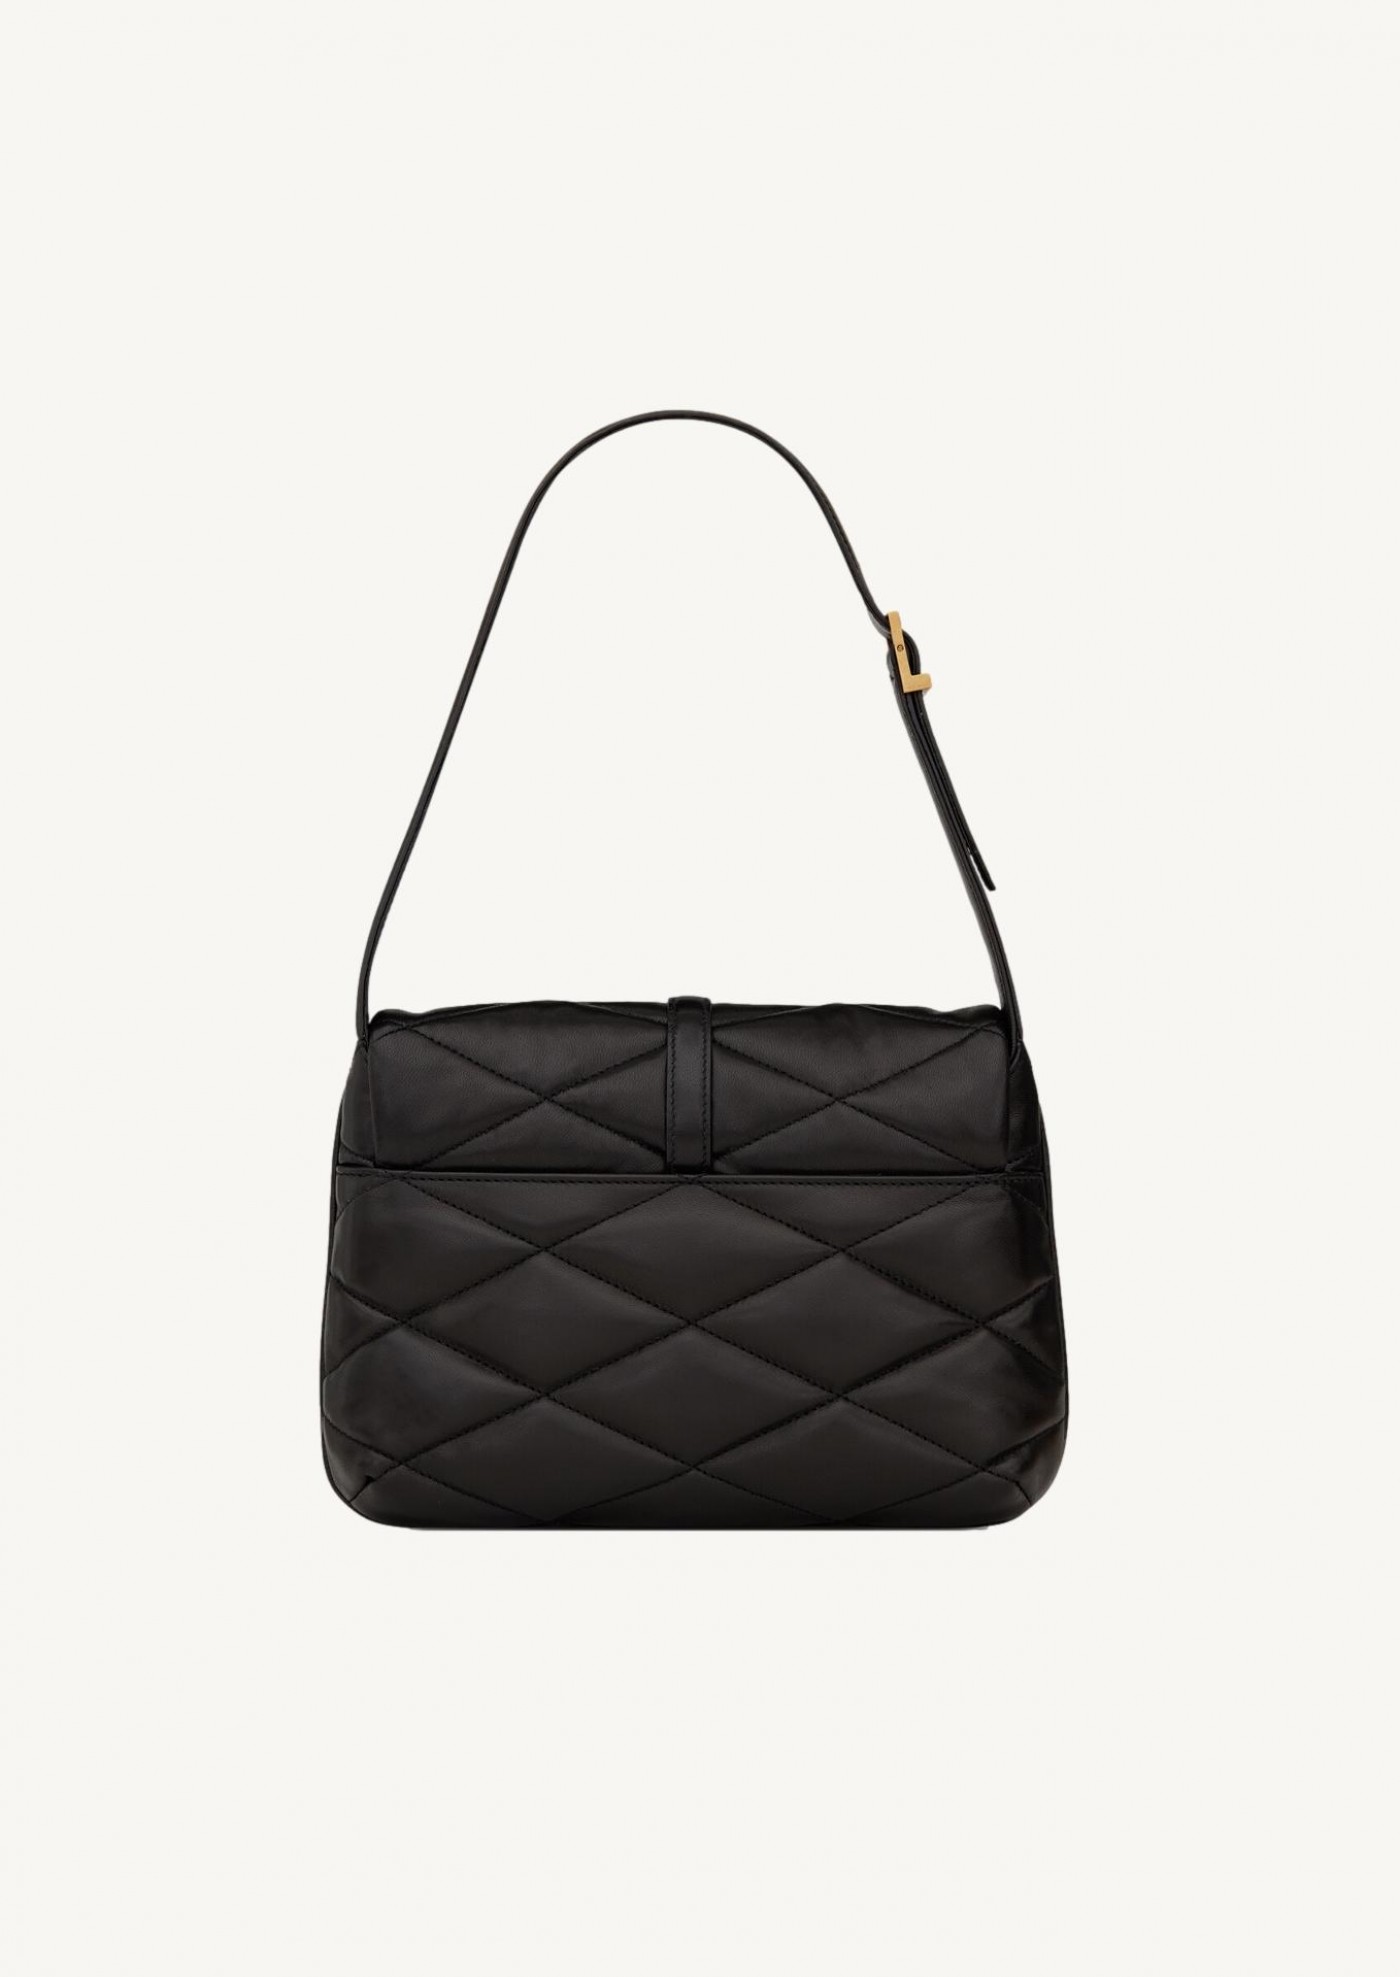 le 57 hobo bag in quilted lambskin black